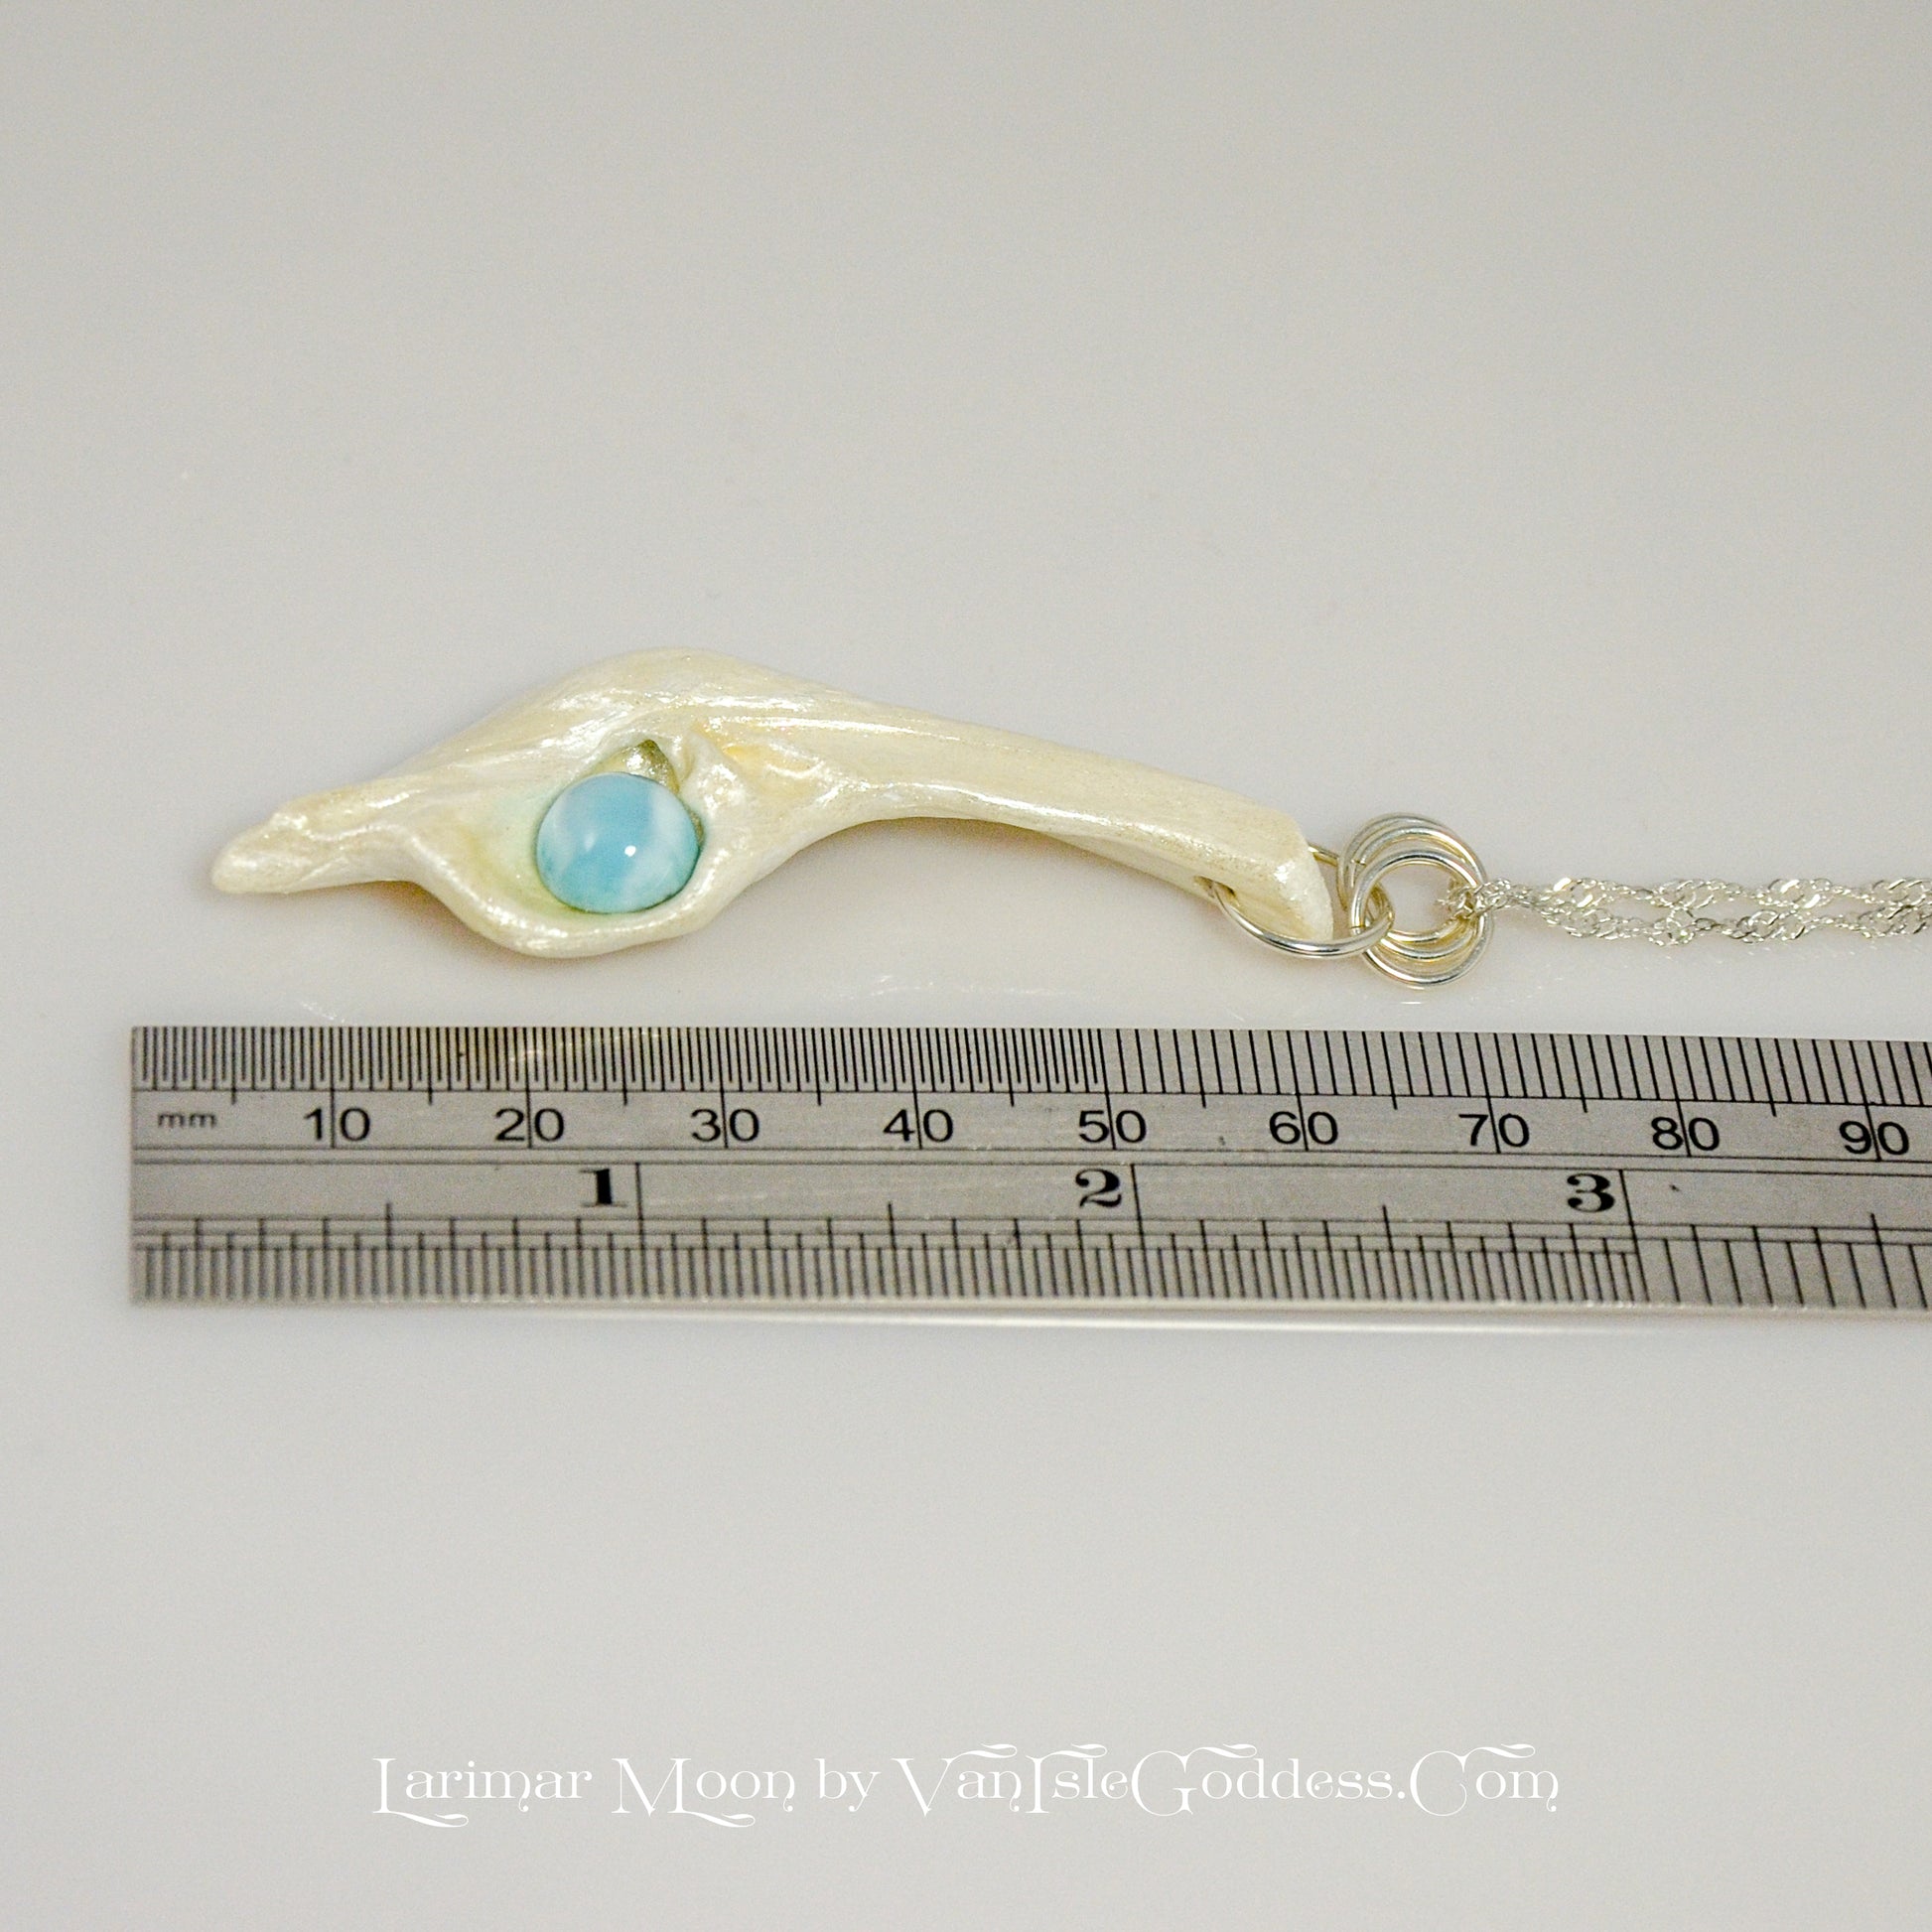 Larimar Moon Natural seashell a beautiful 10 mm Round Larimar Gemstone compliments the pendant. The pendant is shown along side a ruler so the viewer can see the length of the pendant.